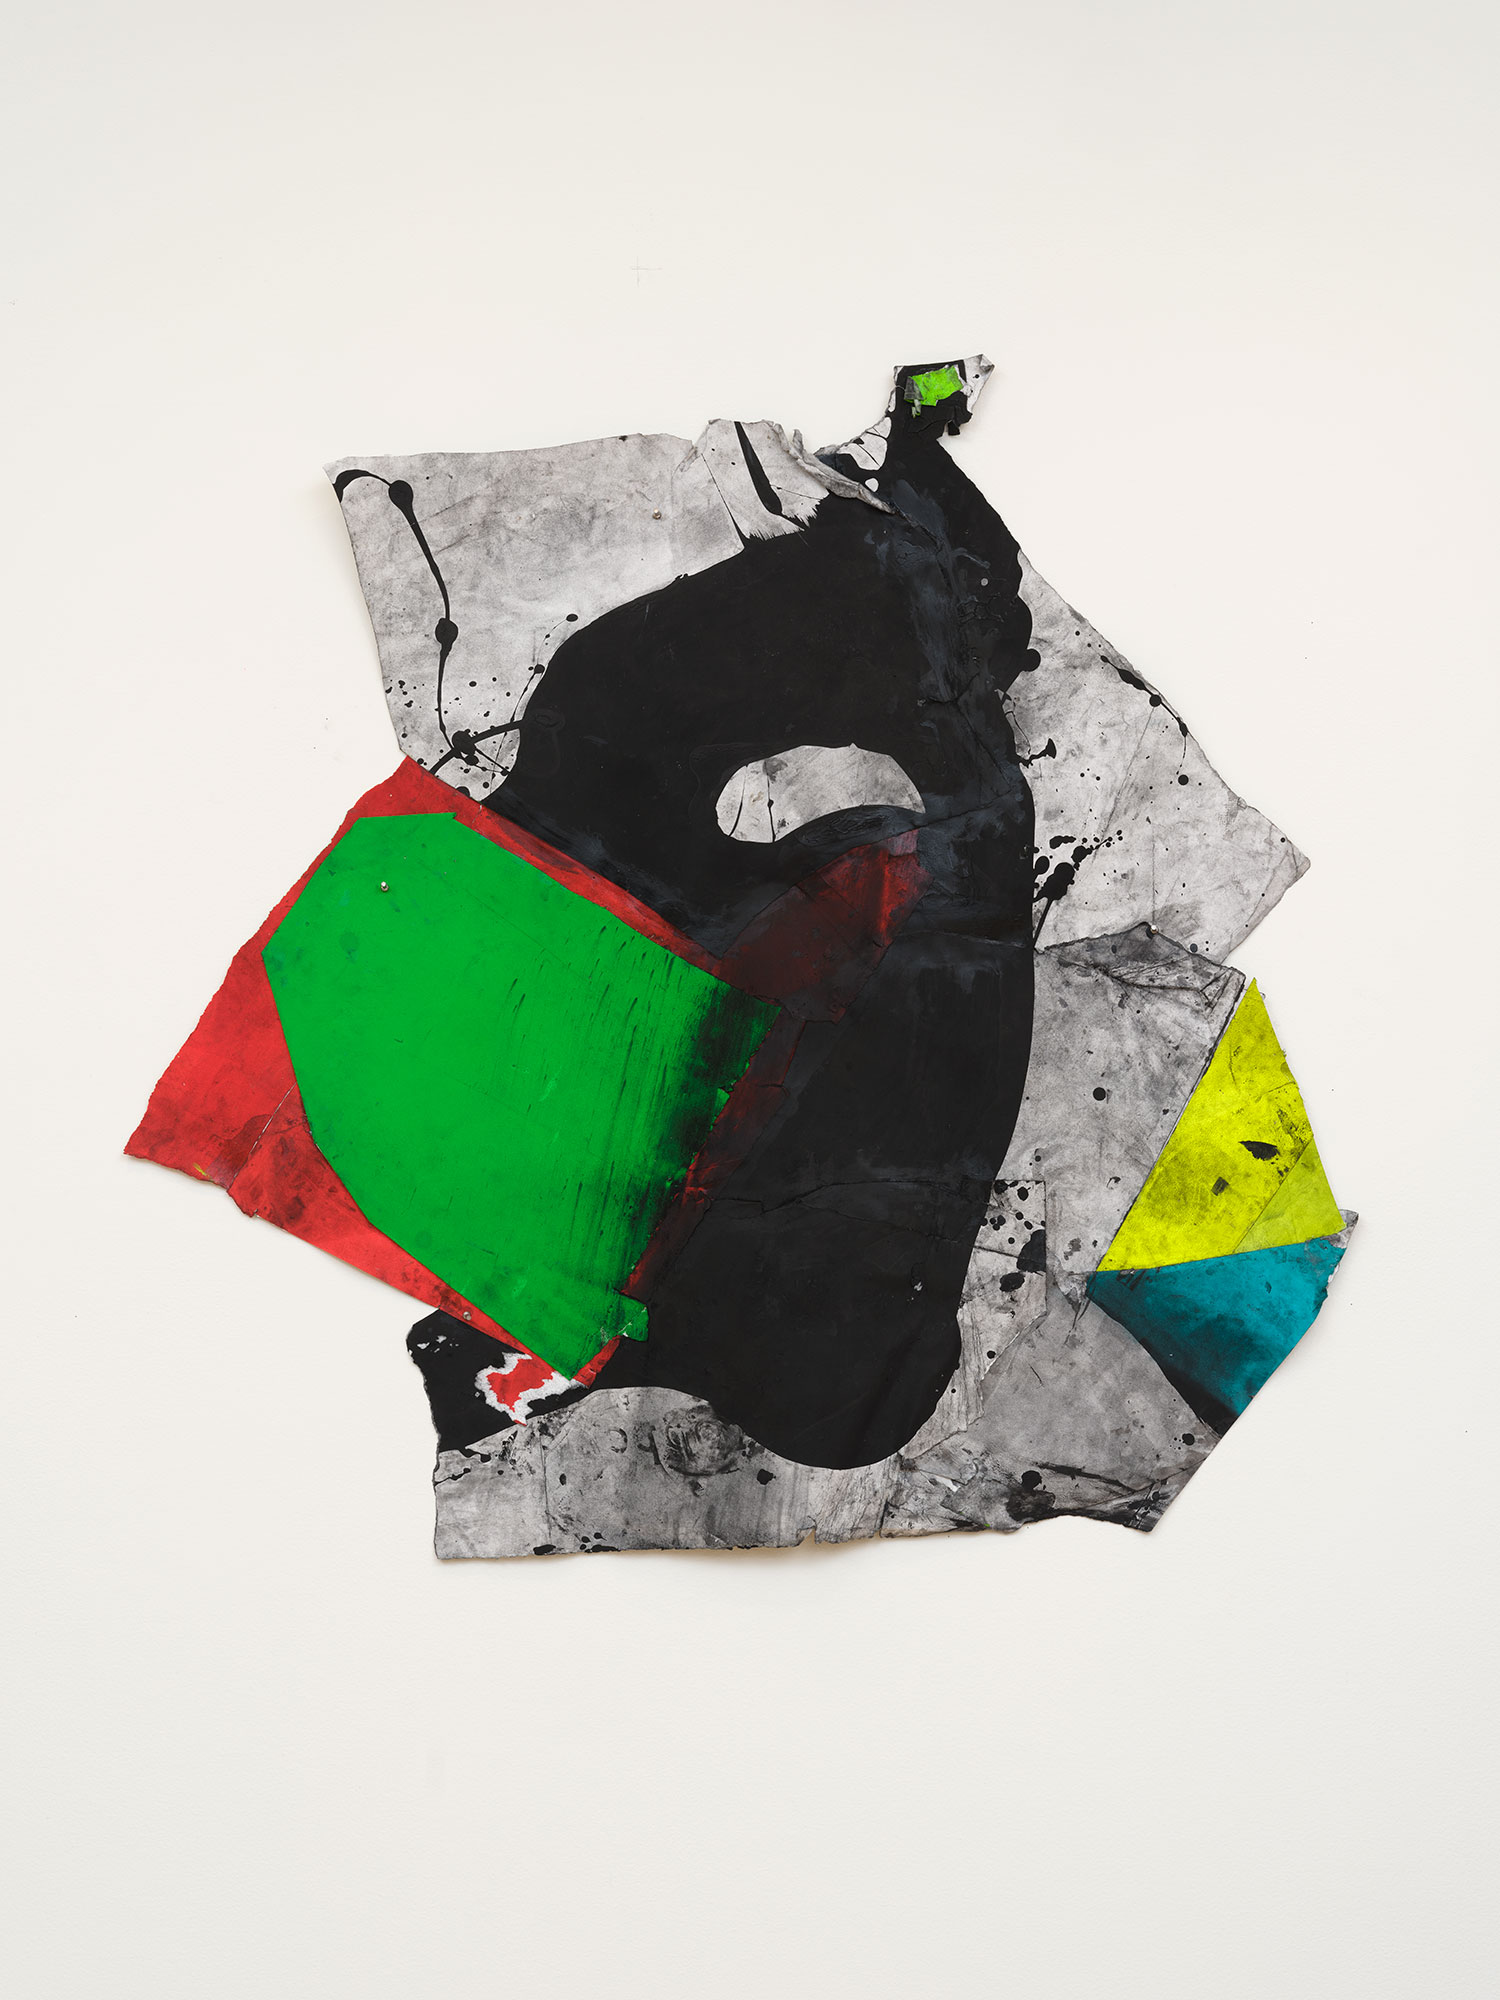 Wesley Kimler / 
Black Tent, 2022 / 
vinyl acrylic, charcoal, and graphite on rag paper / 
48 x 48 in. (121.9 x 121.9 cm)